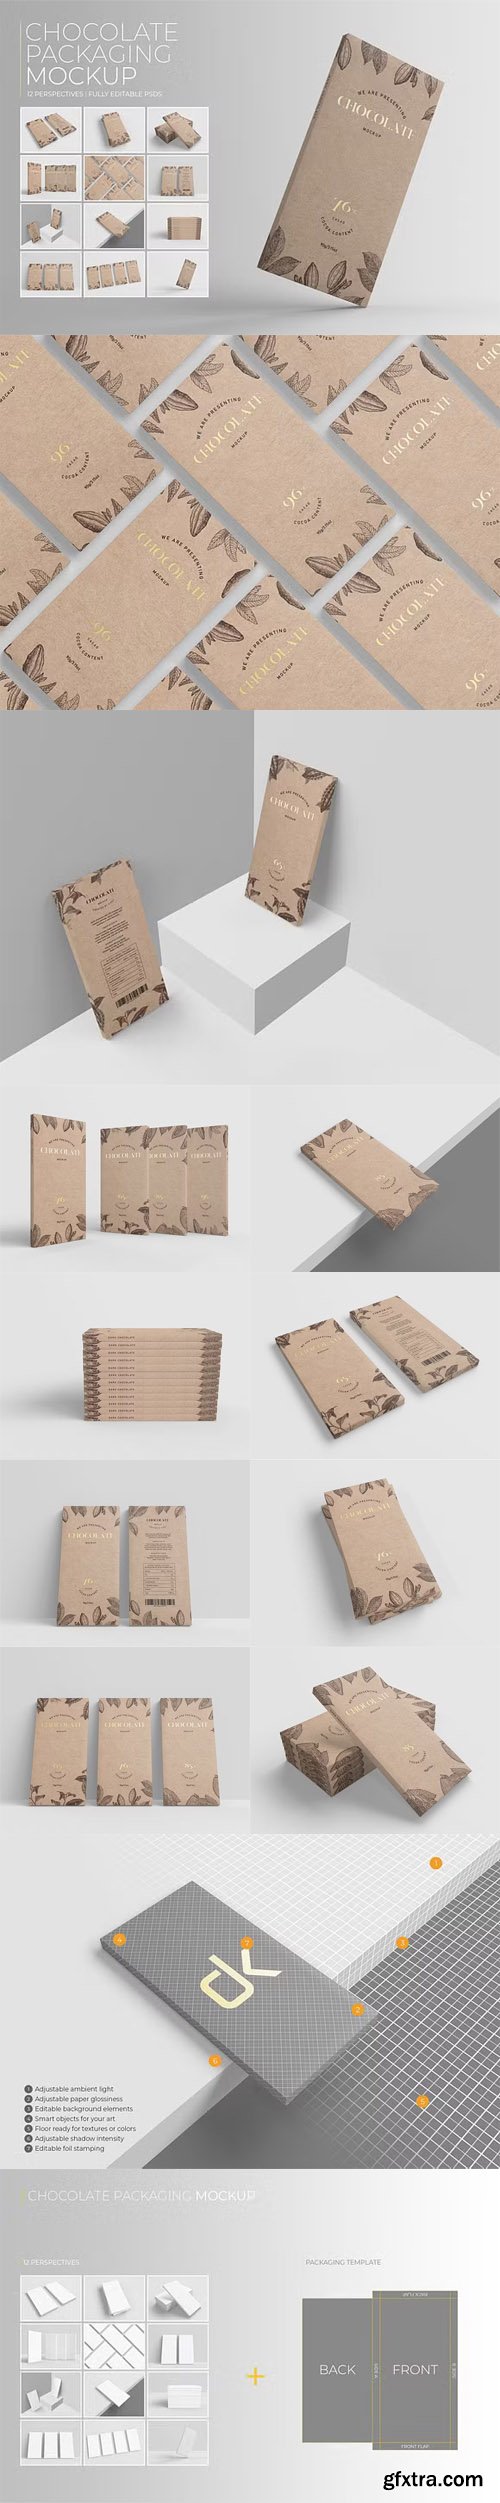 Chocolate Packaging PSD Mockup Templates